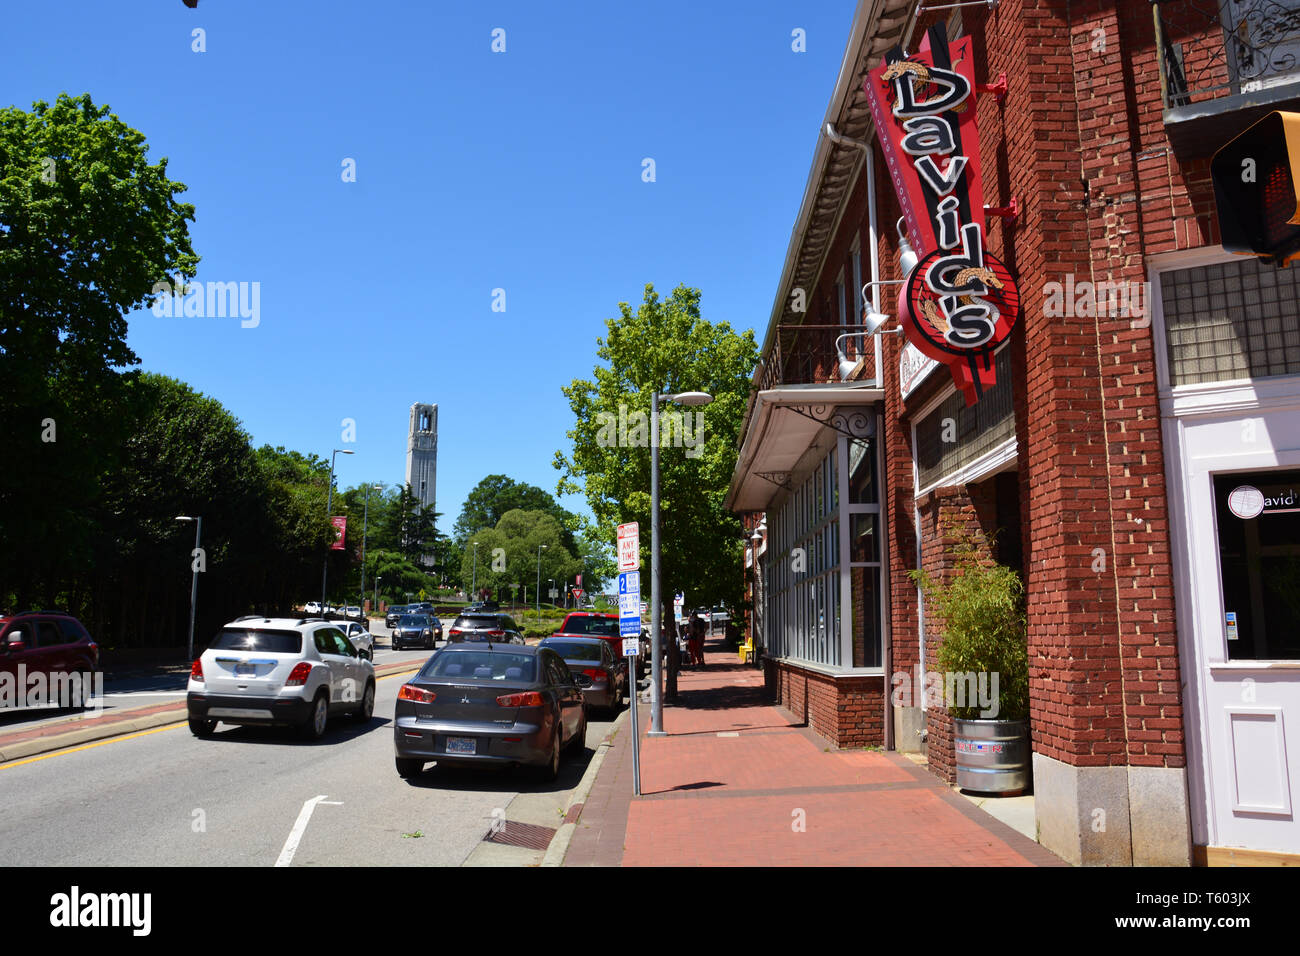 Businesses on Hillsborough Street form part of the social life on the NC State University campus in Raleigh North Carolina. Stock Photo